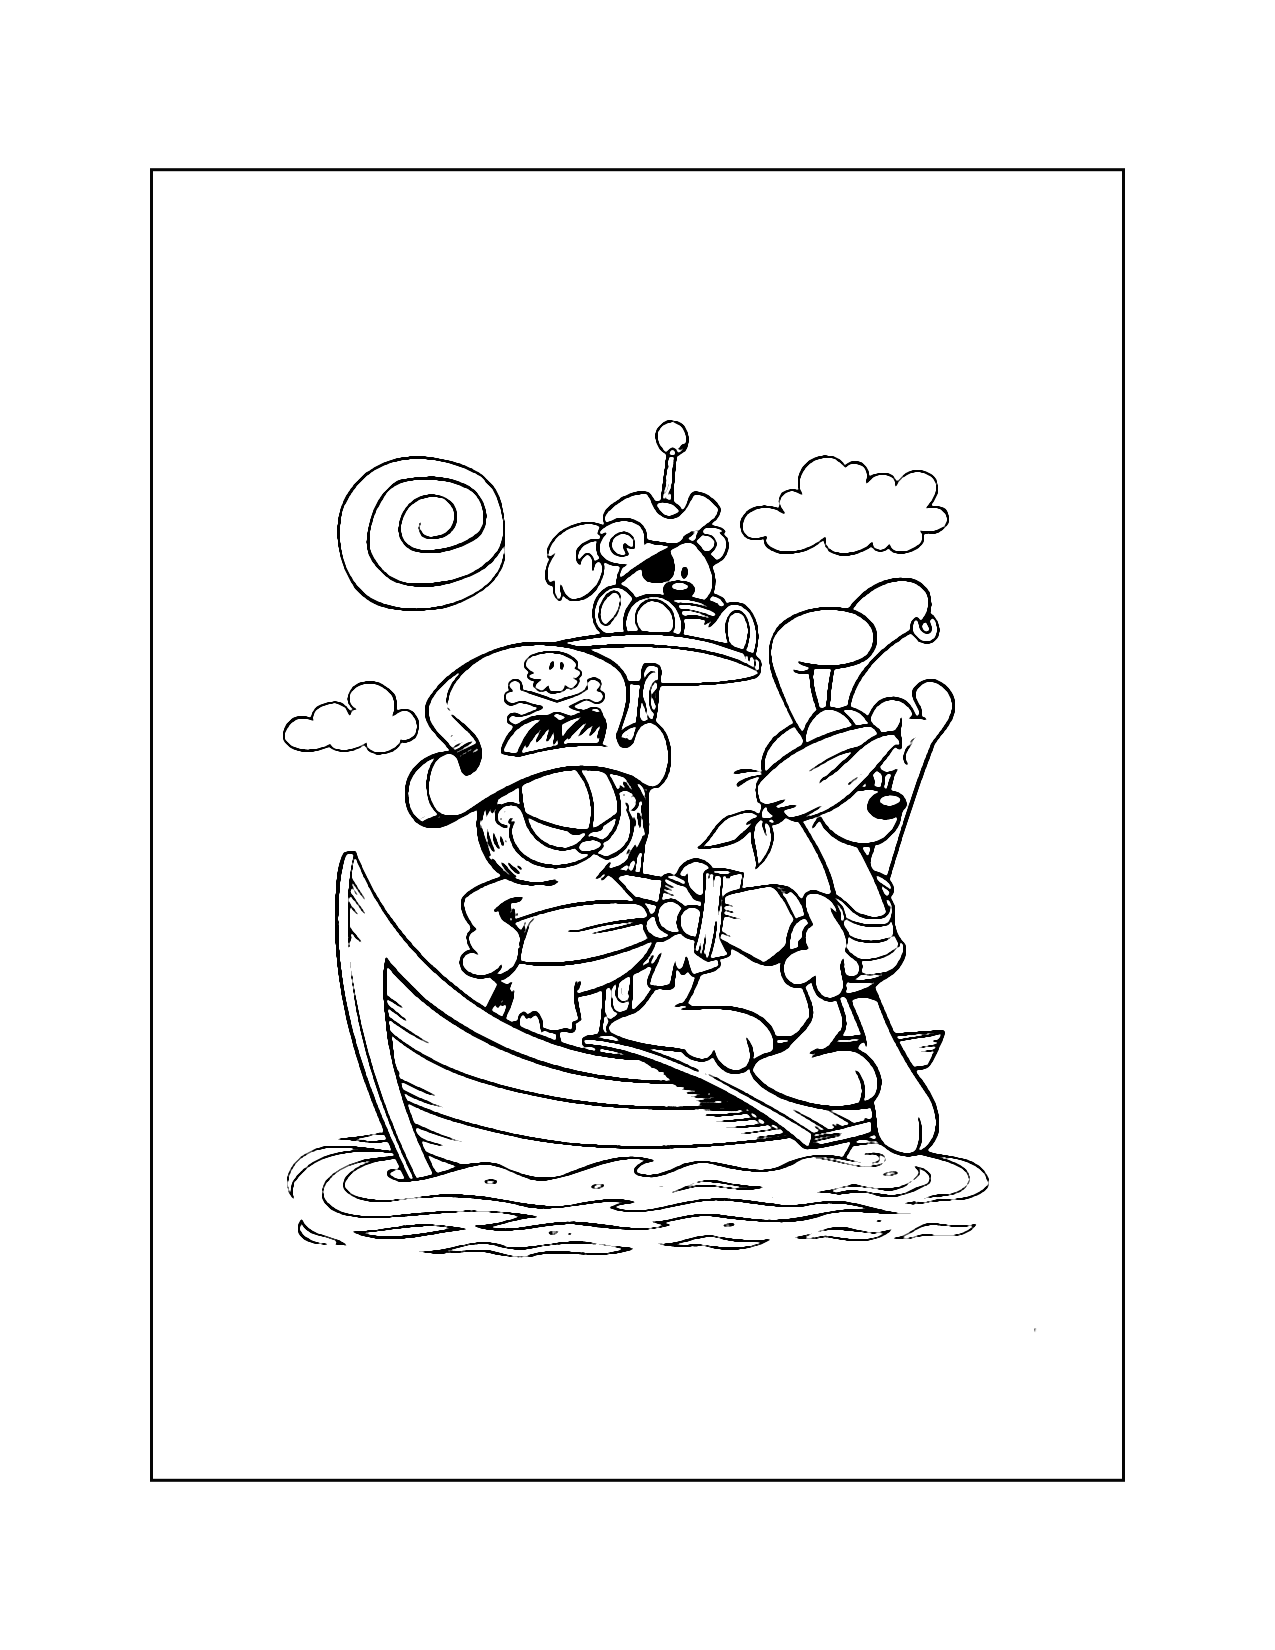 Garfield And Odie On Pirate Ship Coloring Page